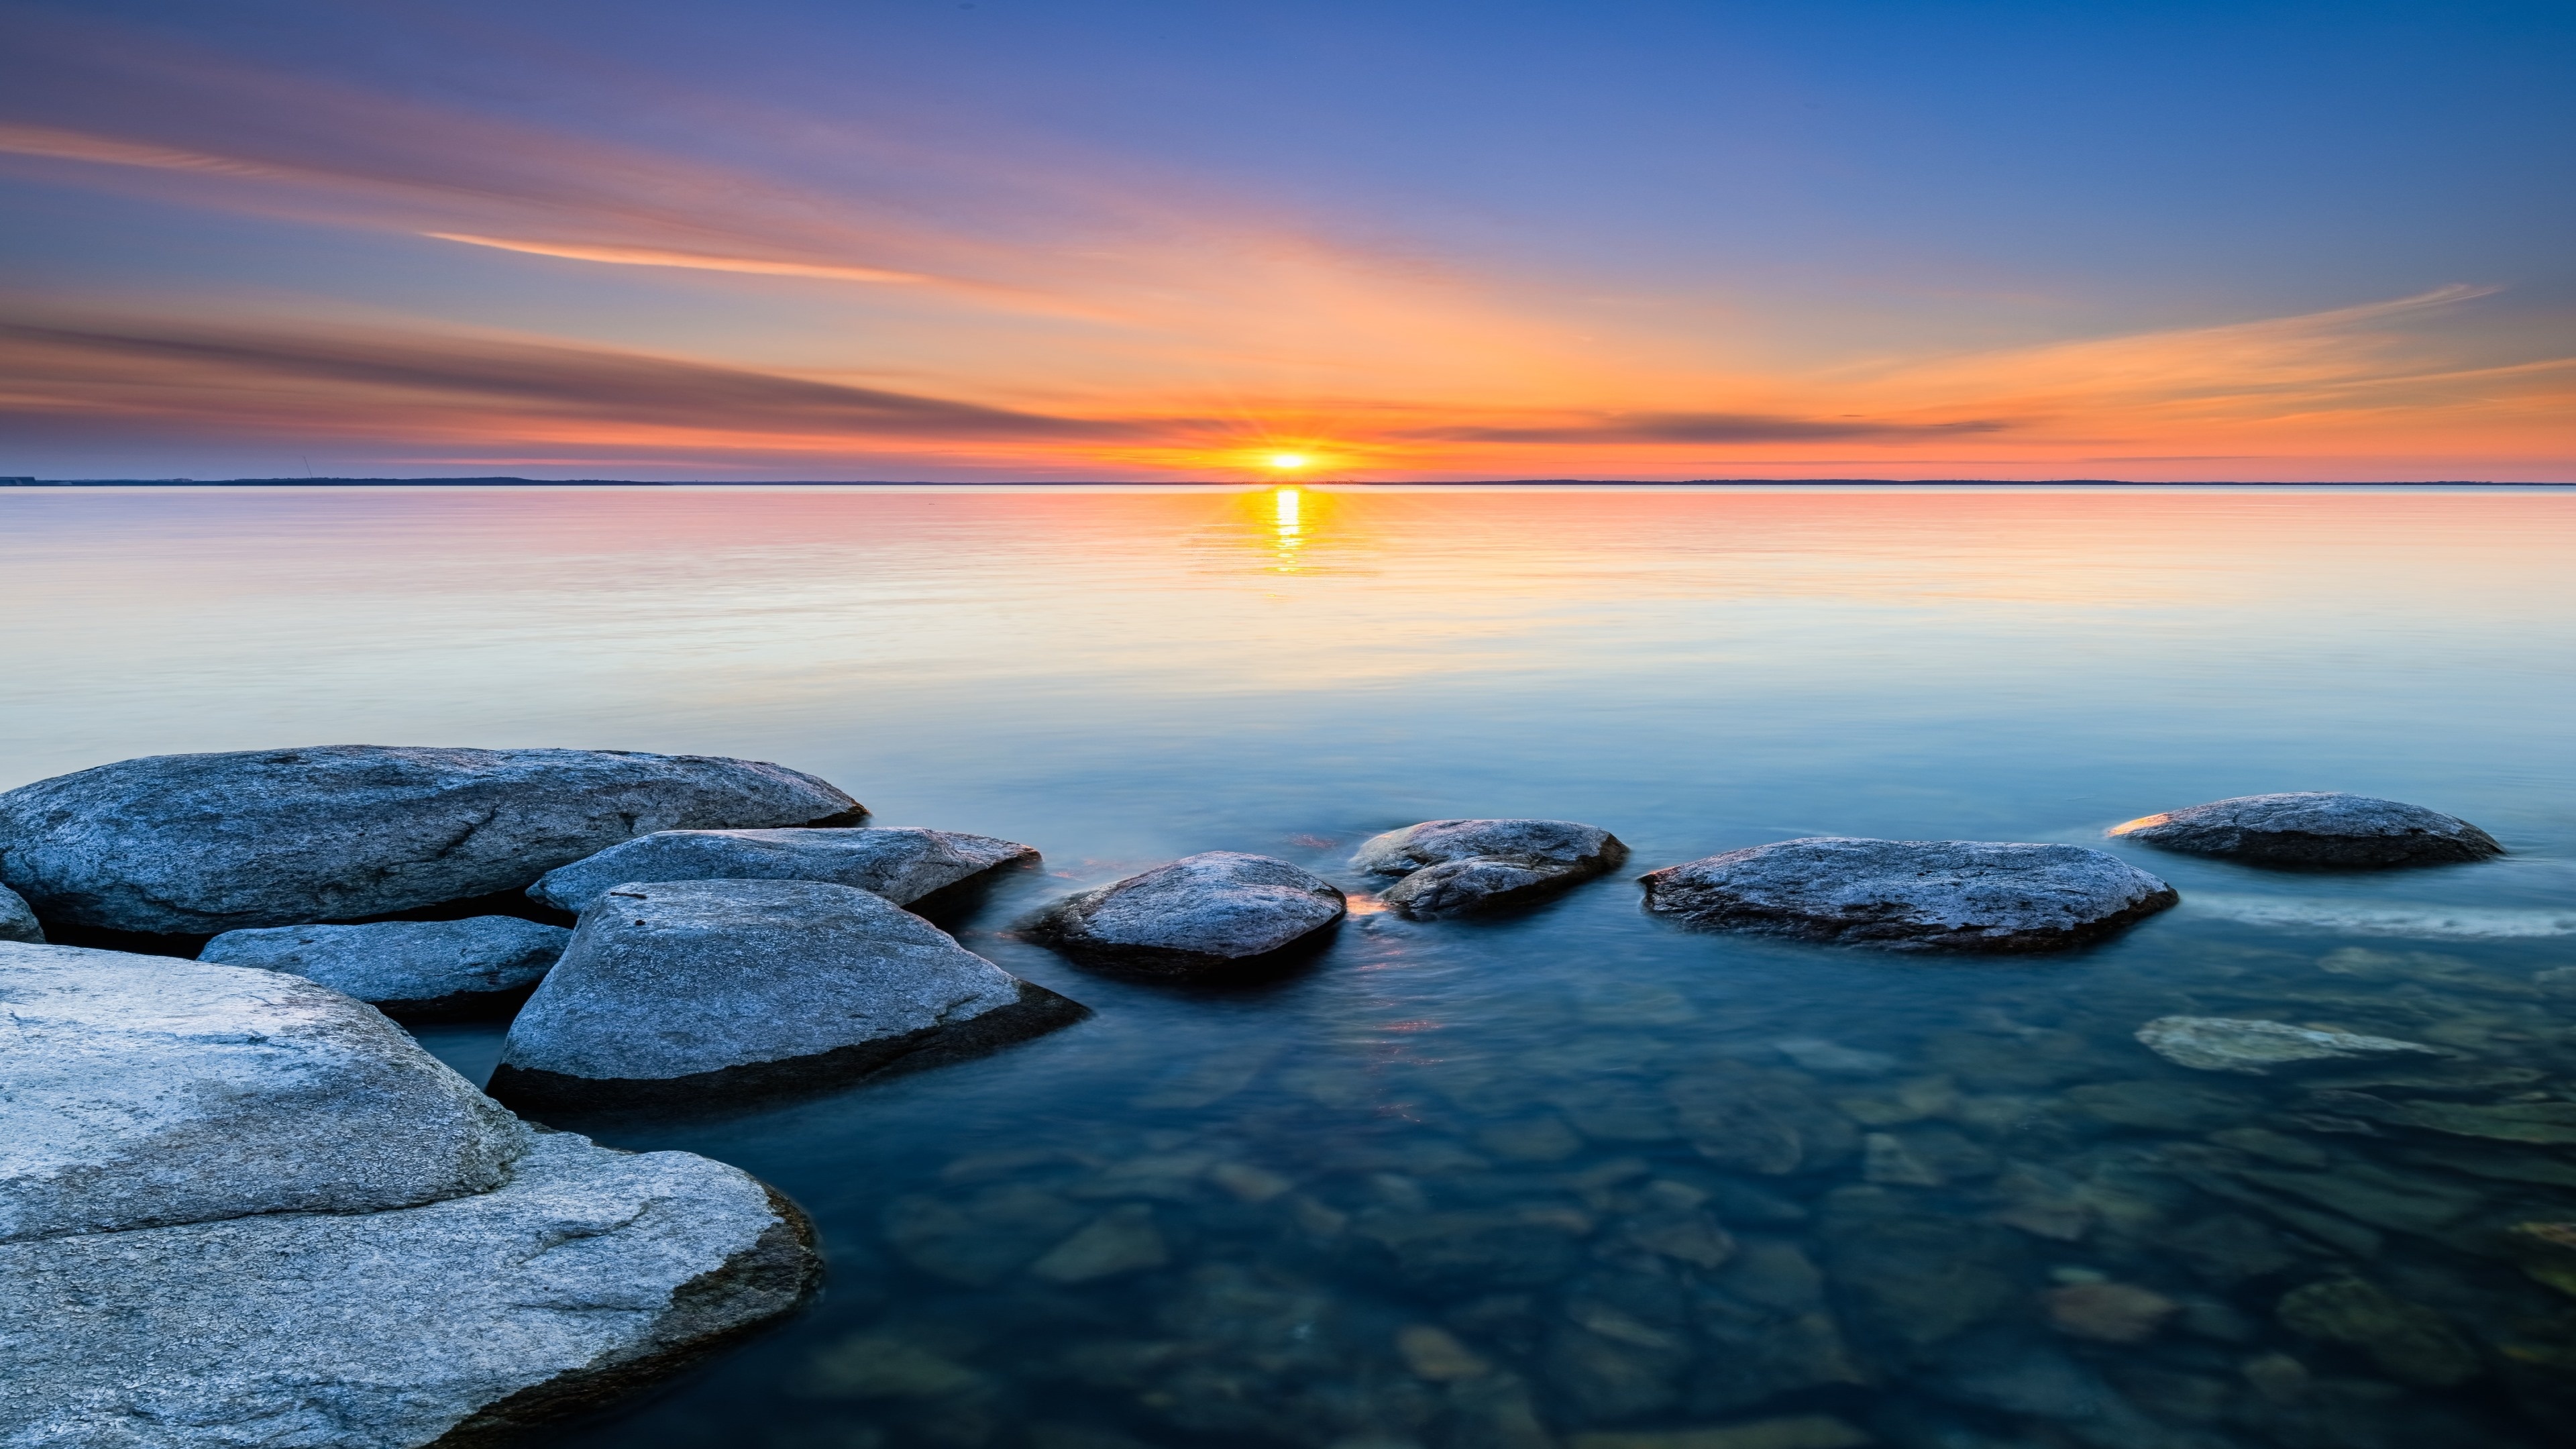 Seascape: The rare still water moment at the rocky coast of the sea, Sunset time. 3840x2160 4K Background.